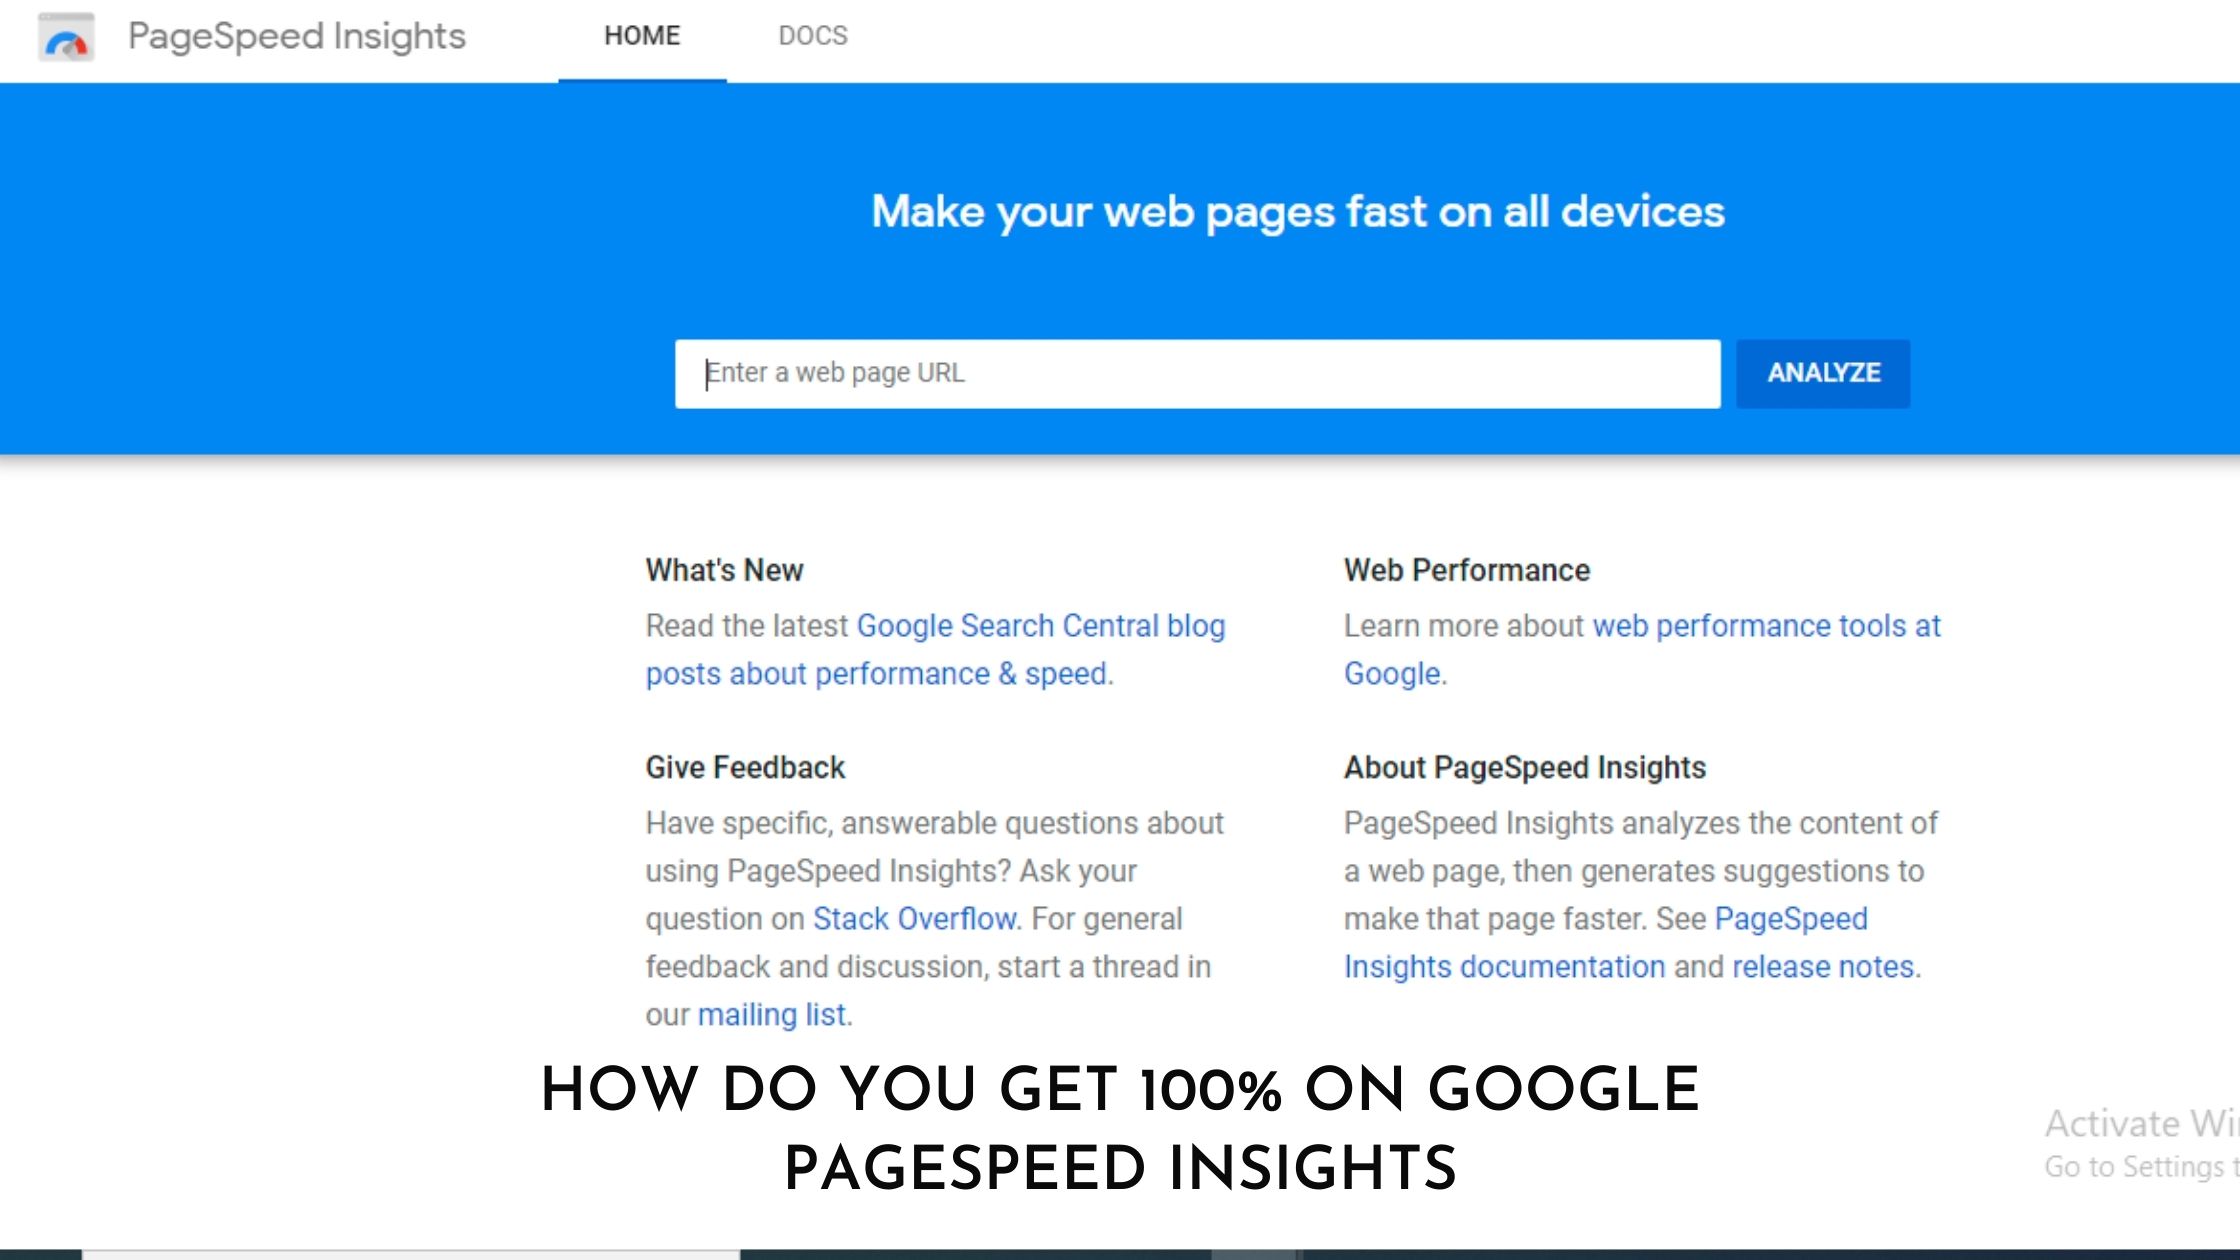 How do you get 100% on Google PageSpeed Insights